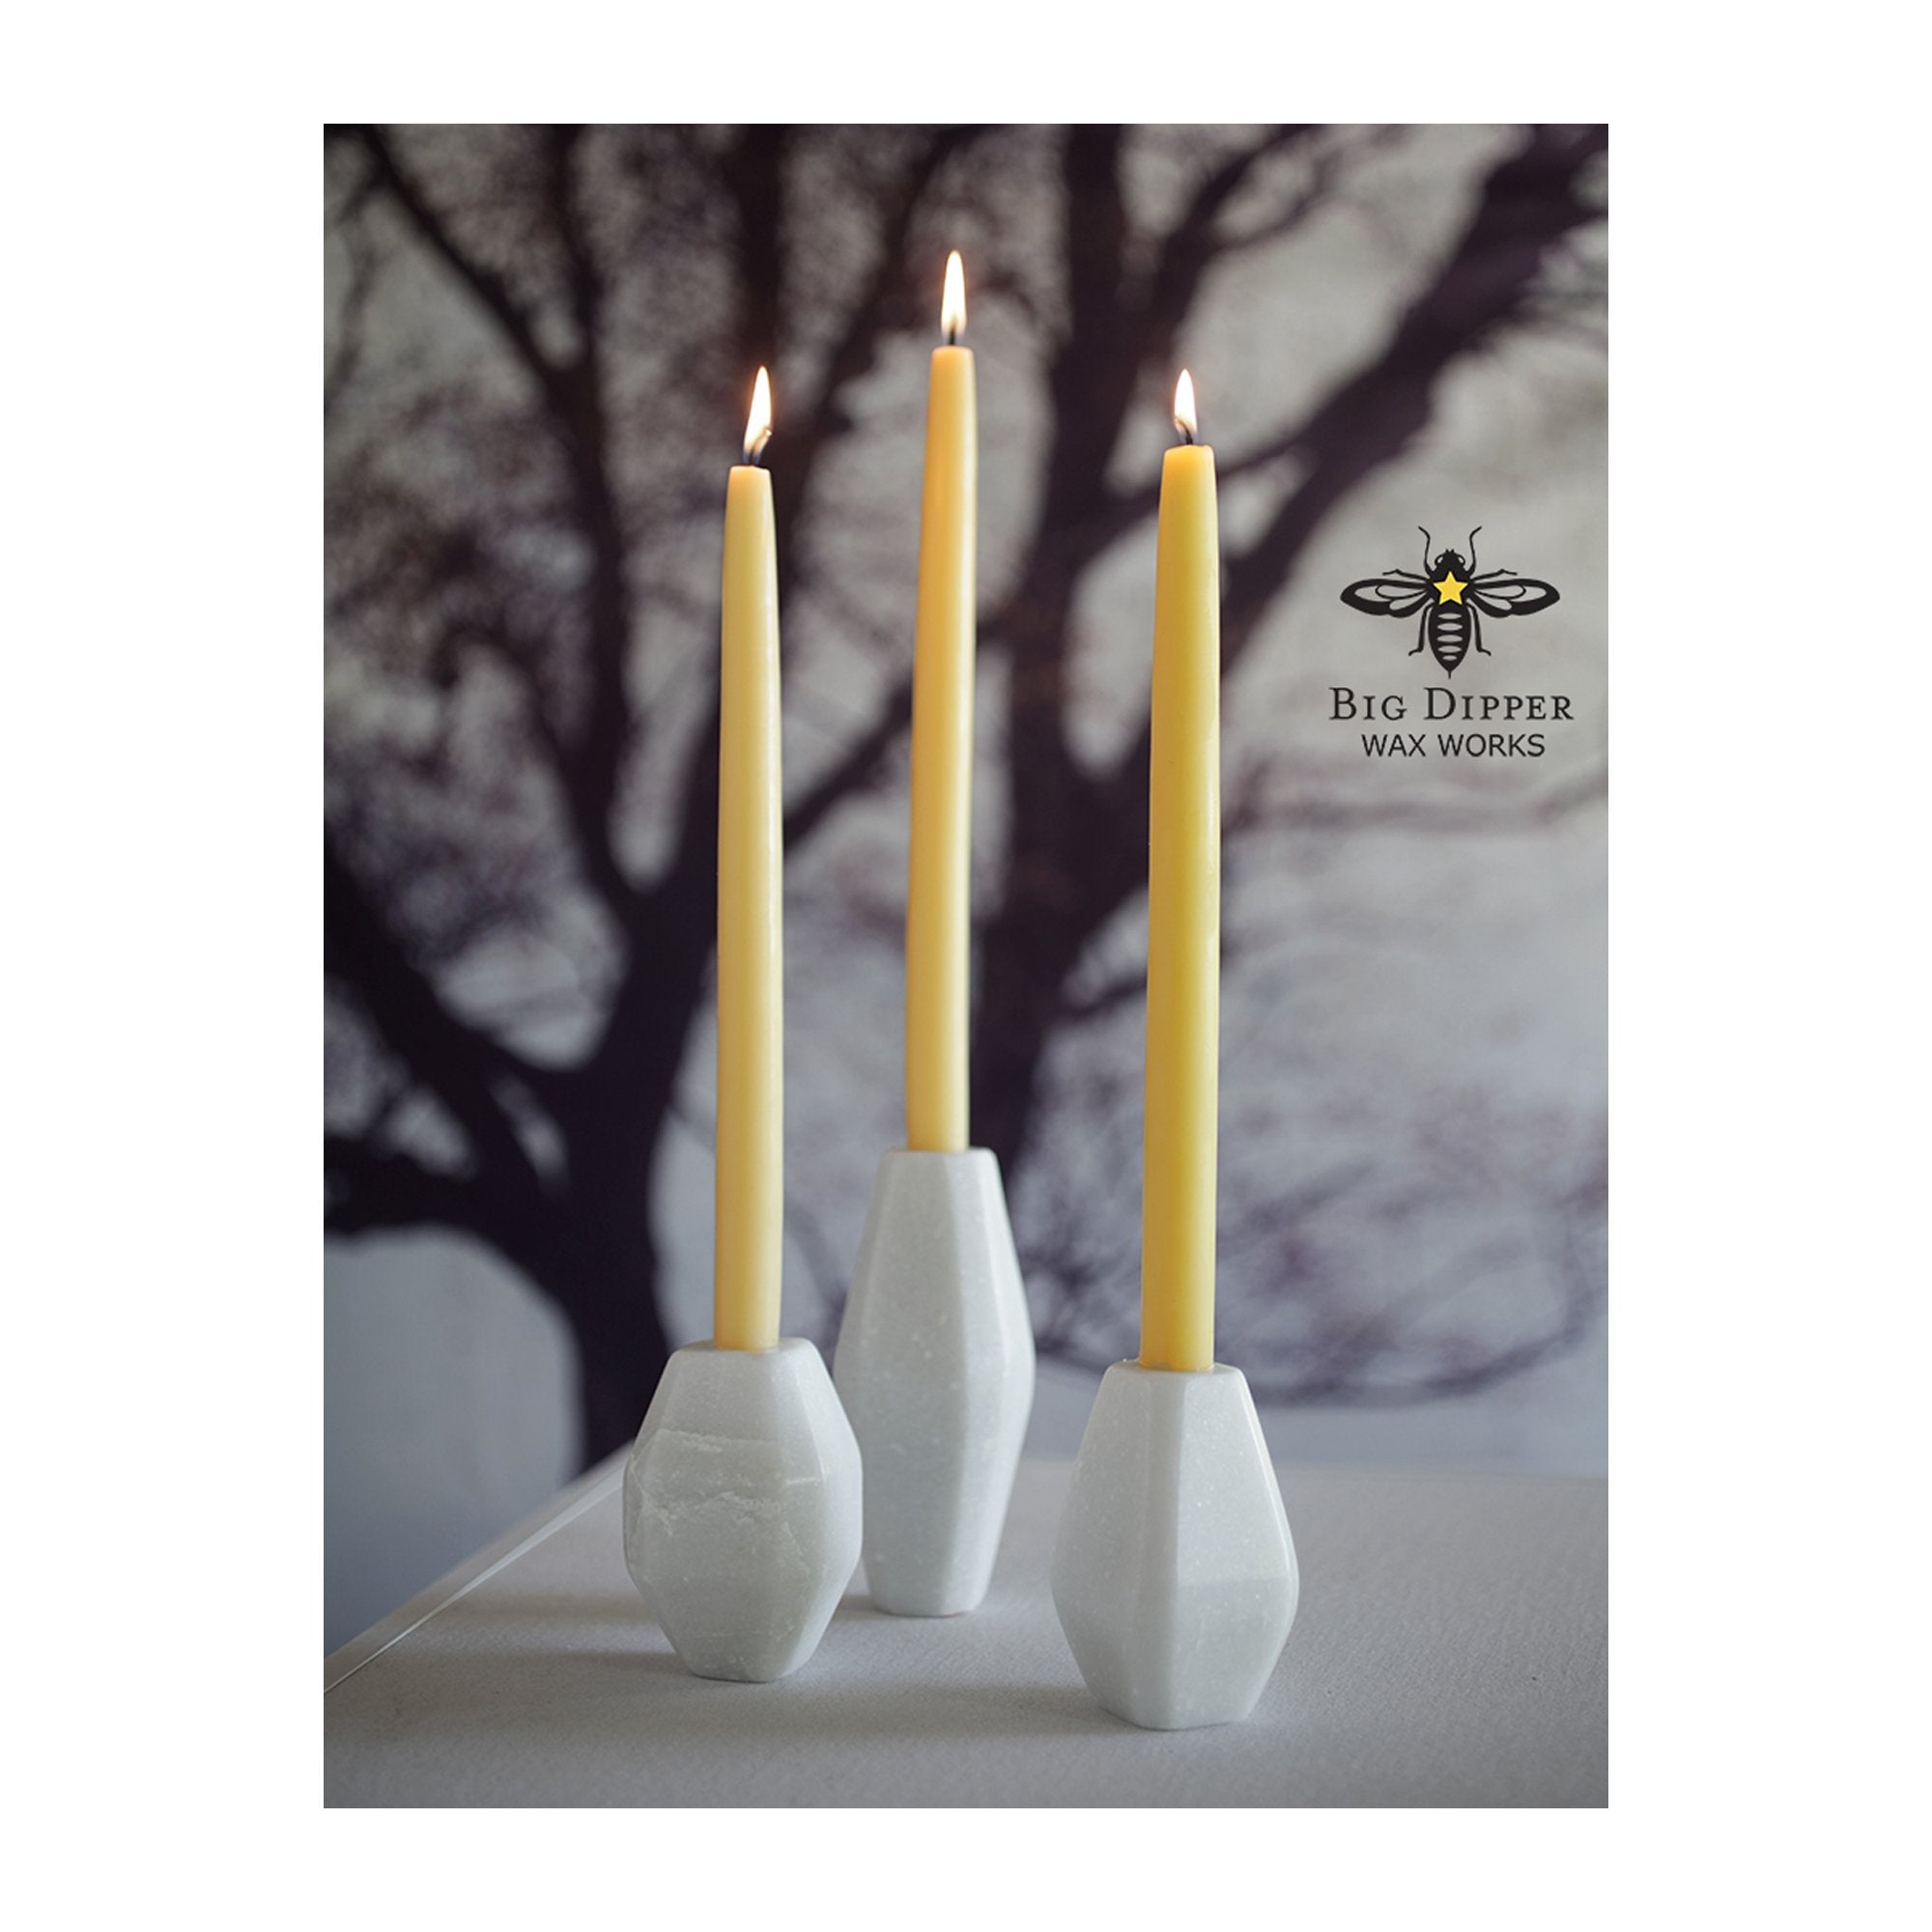 Scented 100 Percent Beeswax Taper Candles - Incense candles